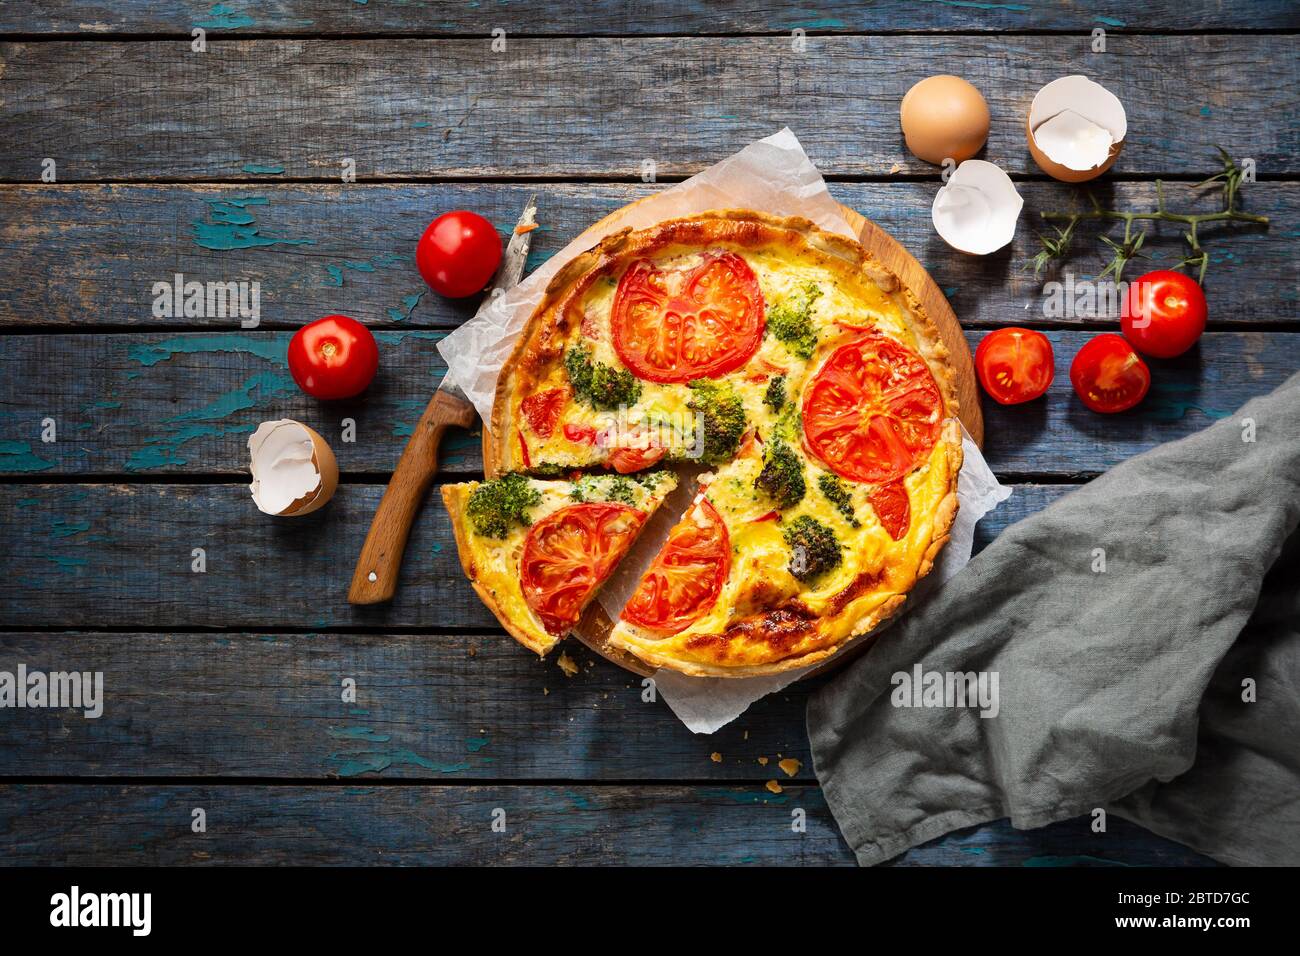 Overhead view of Veggies quiche on rustic table Stock Photo